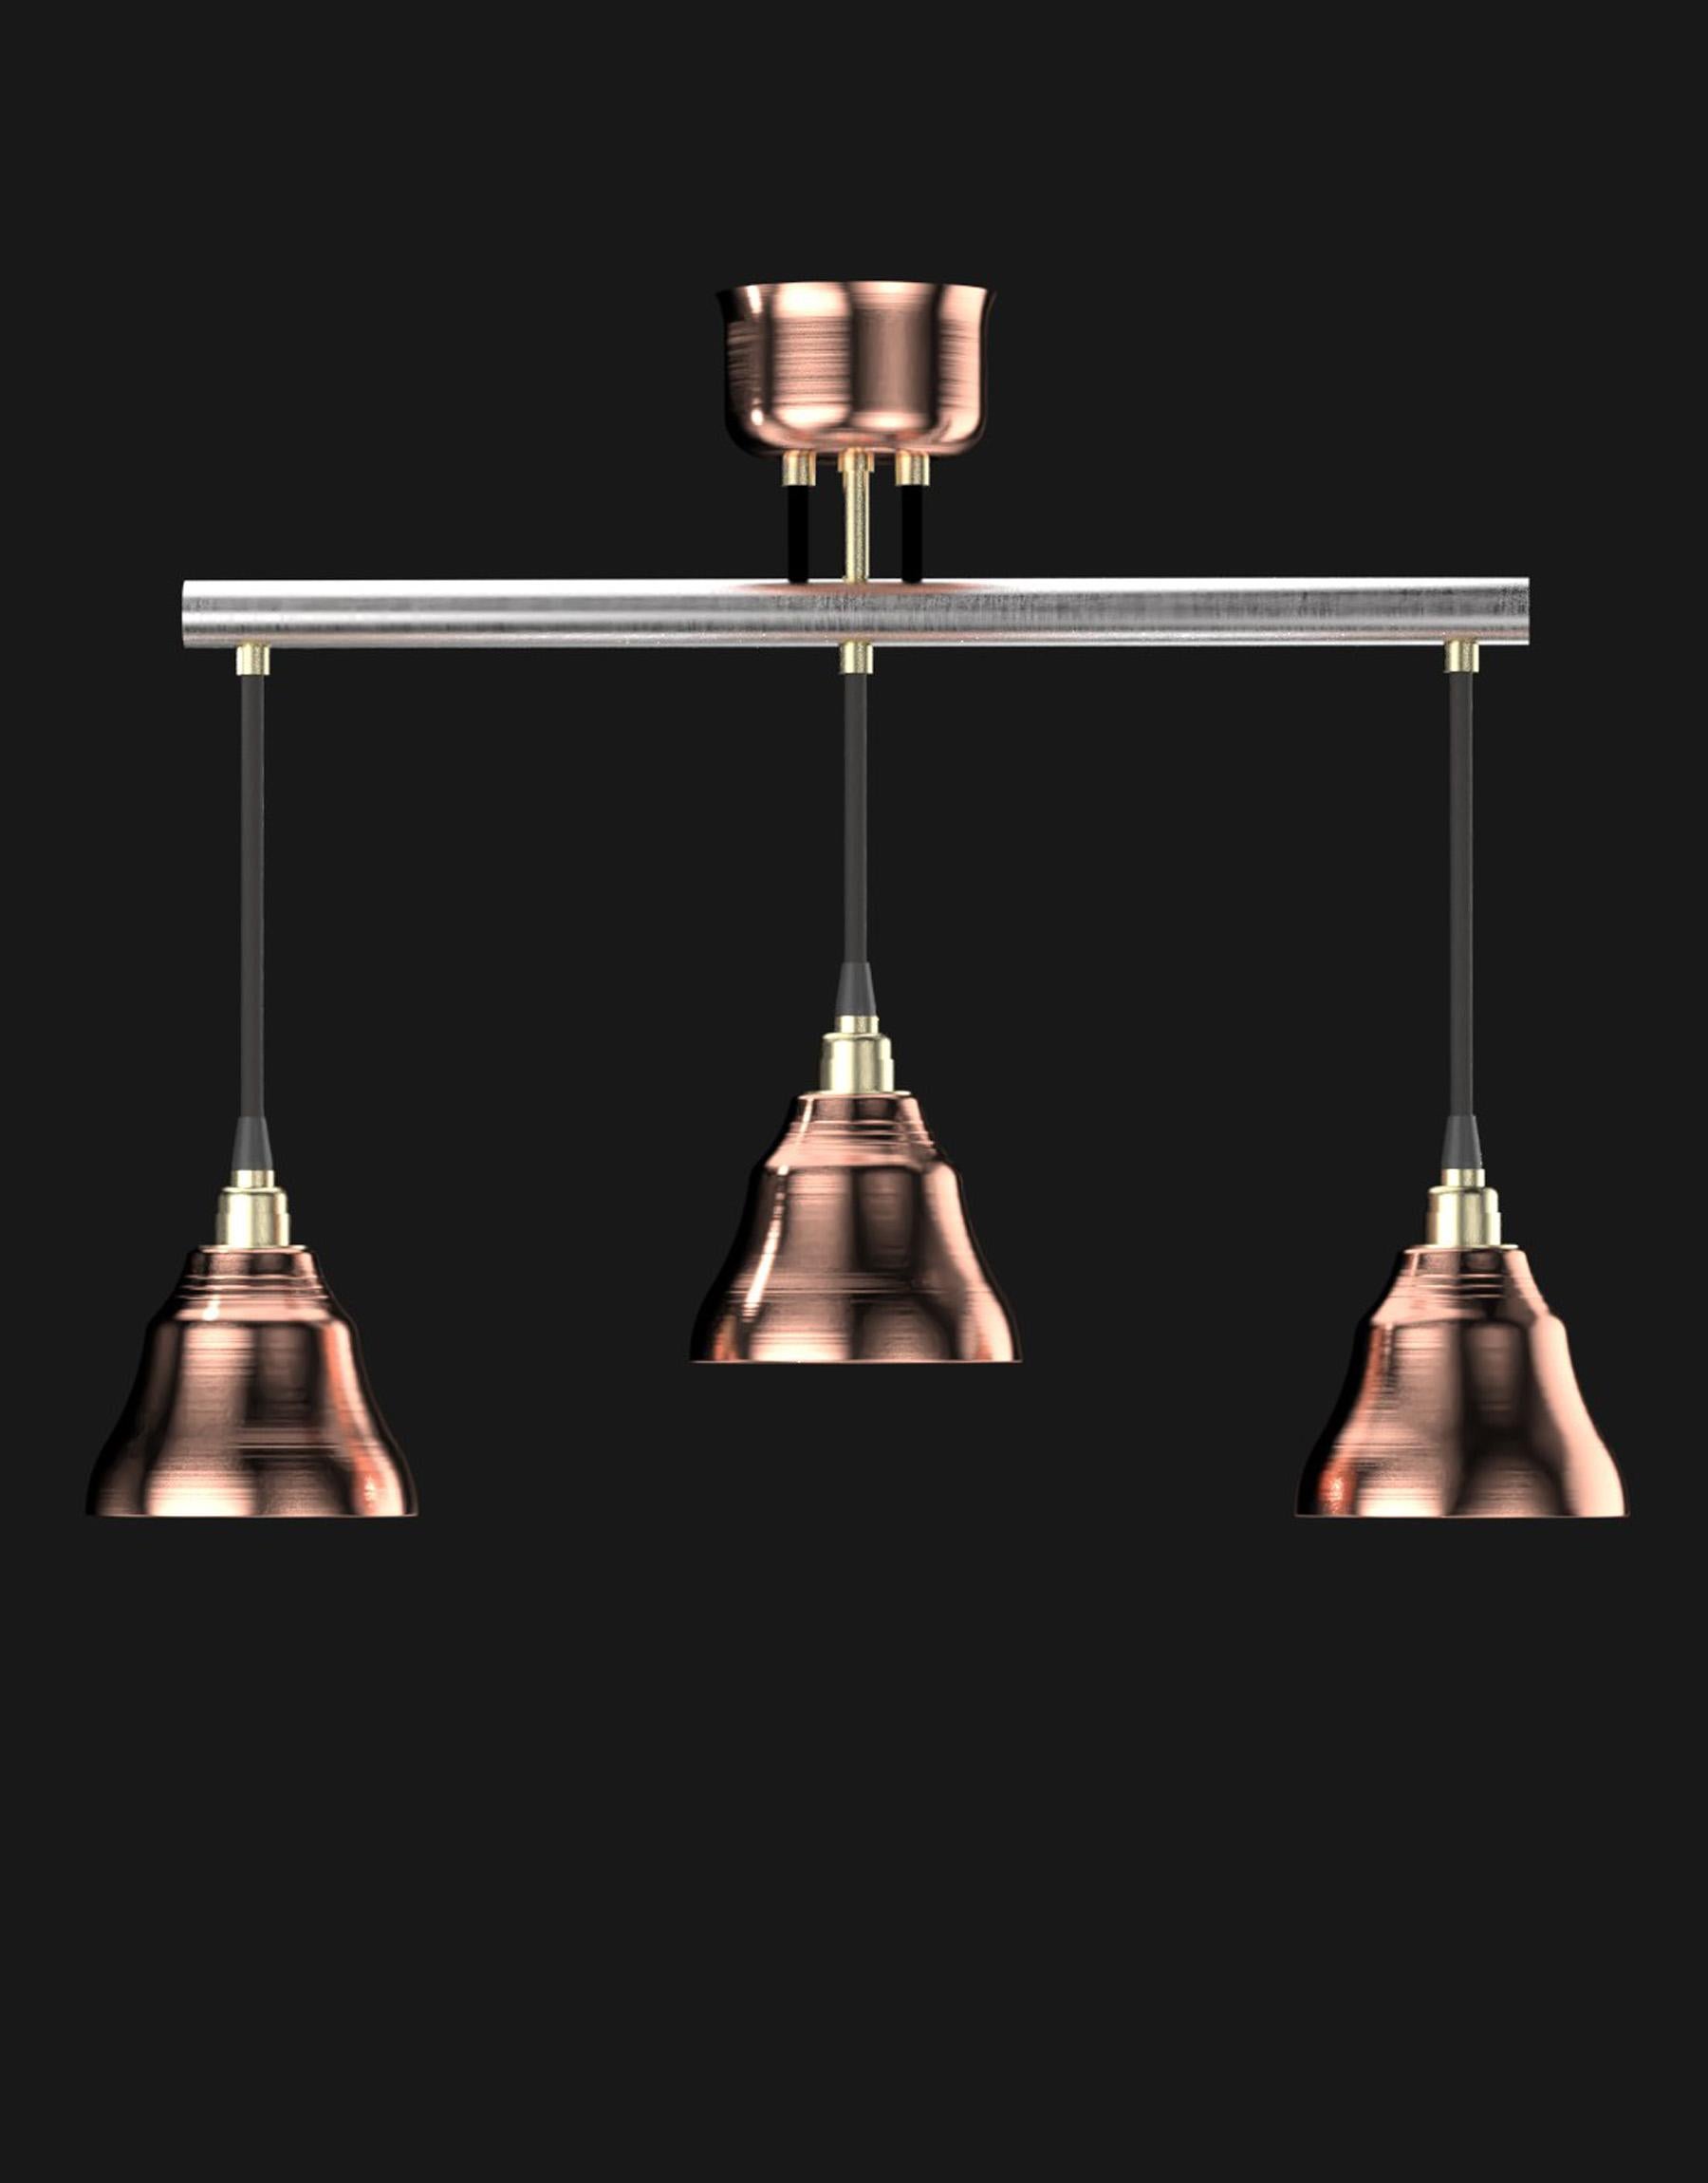 Hand-Crafted Edimate Stainless Steel / Copper Spot V3 Ceiling Light, Handmade in France For Sale